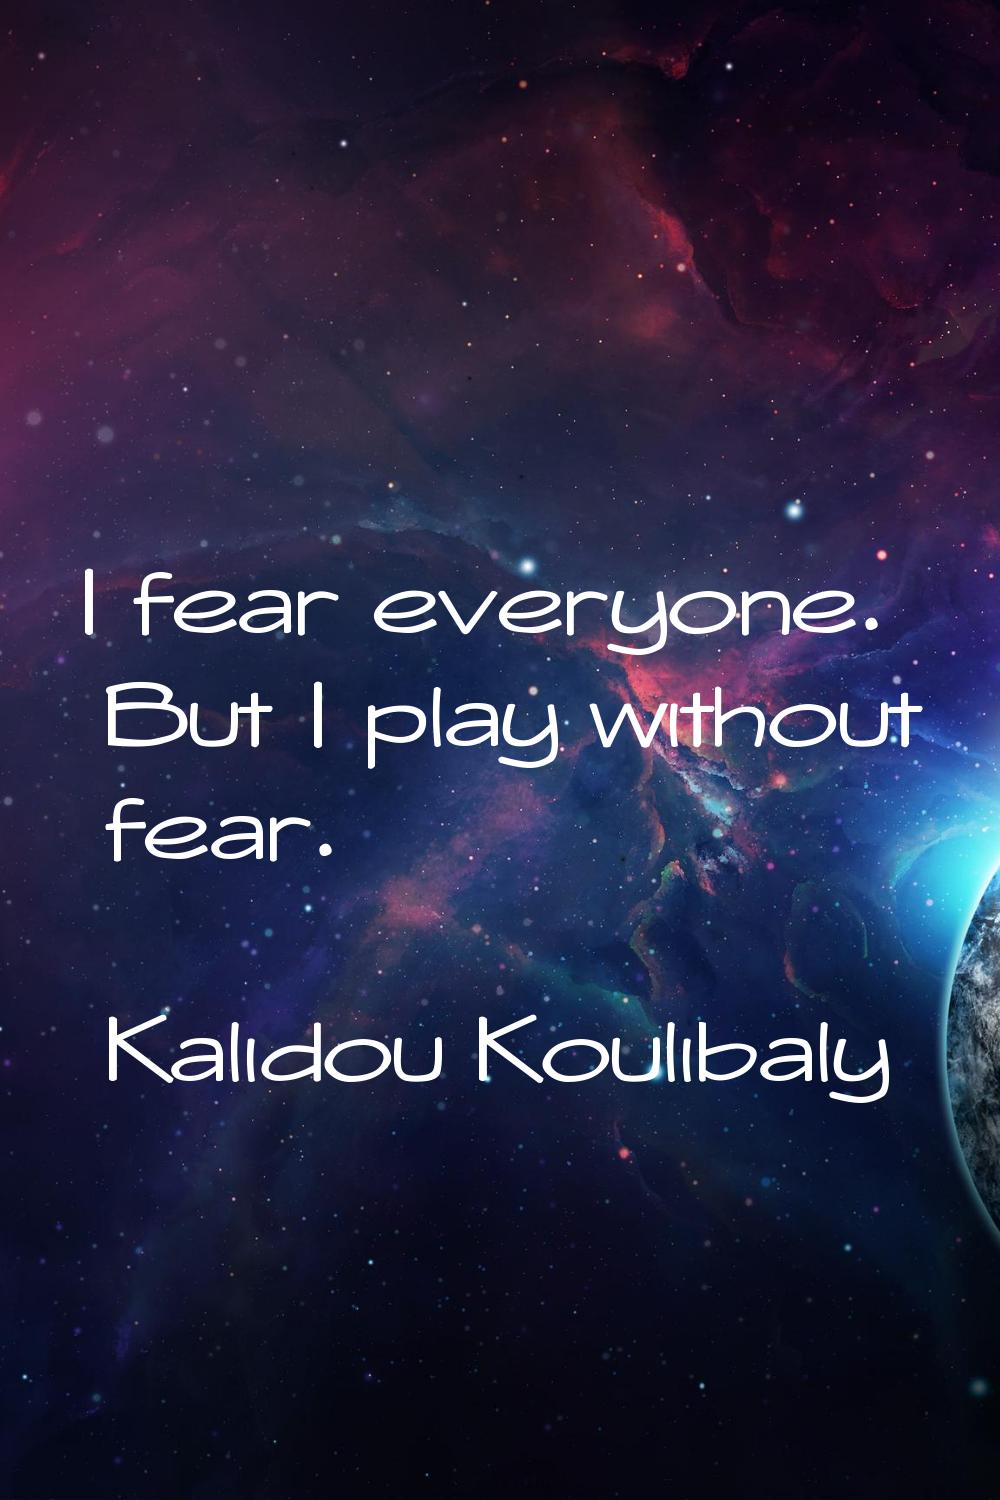 I fear everyone. But I play without fear.